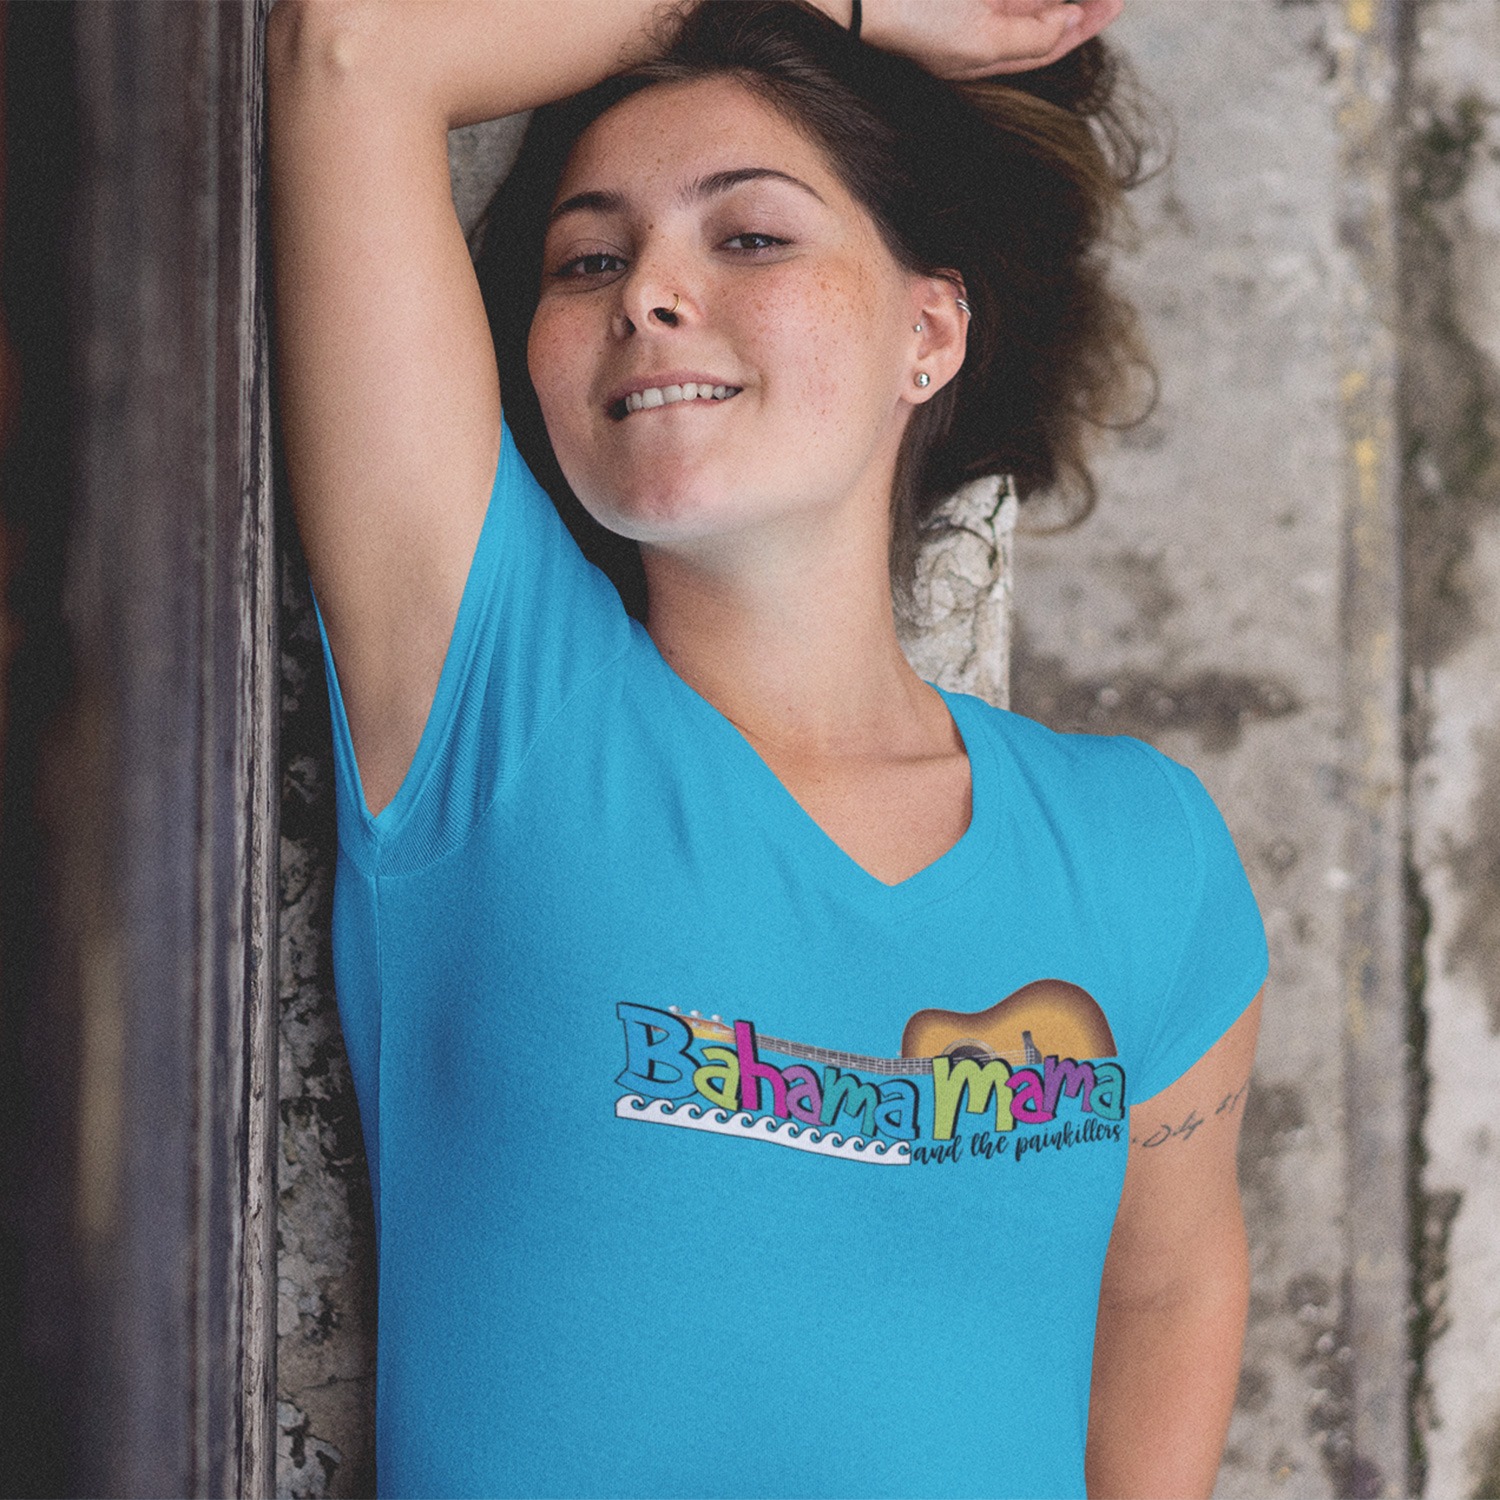 Bahama Mama and the Painkillers Double T Womens Vneck Fitted Tee, The Troprock Shop